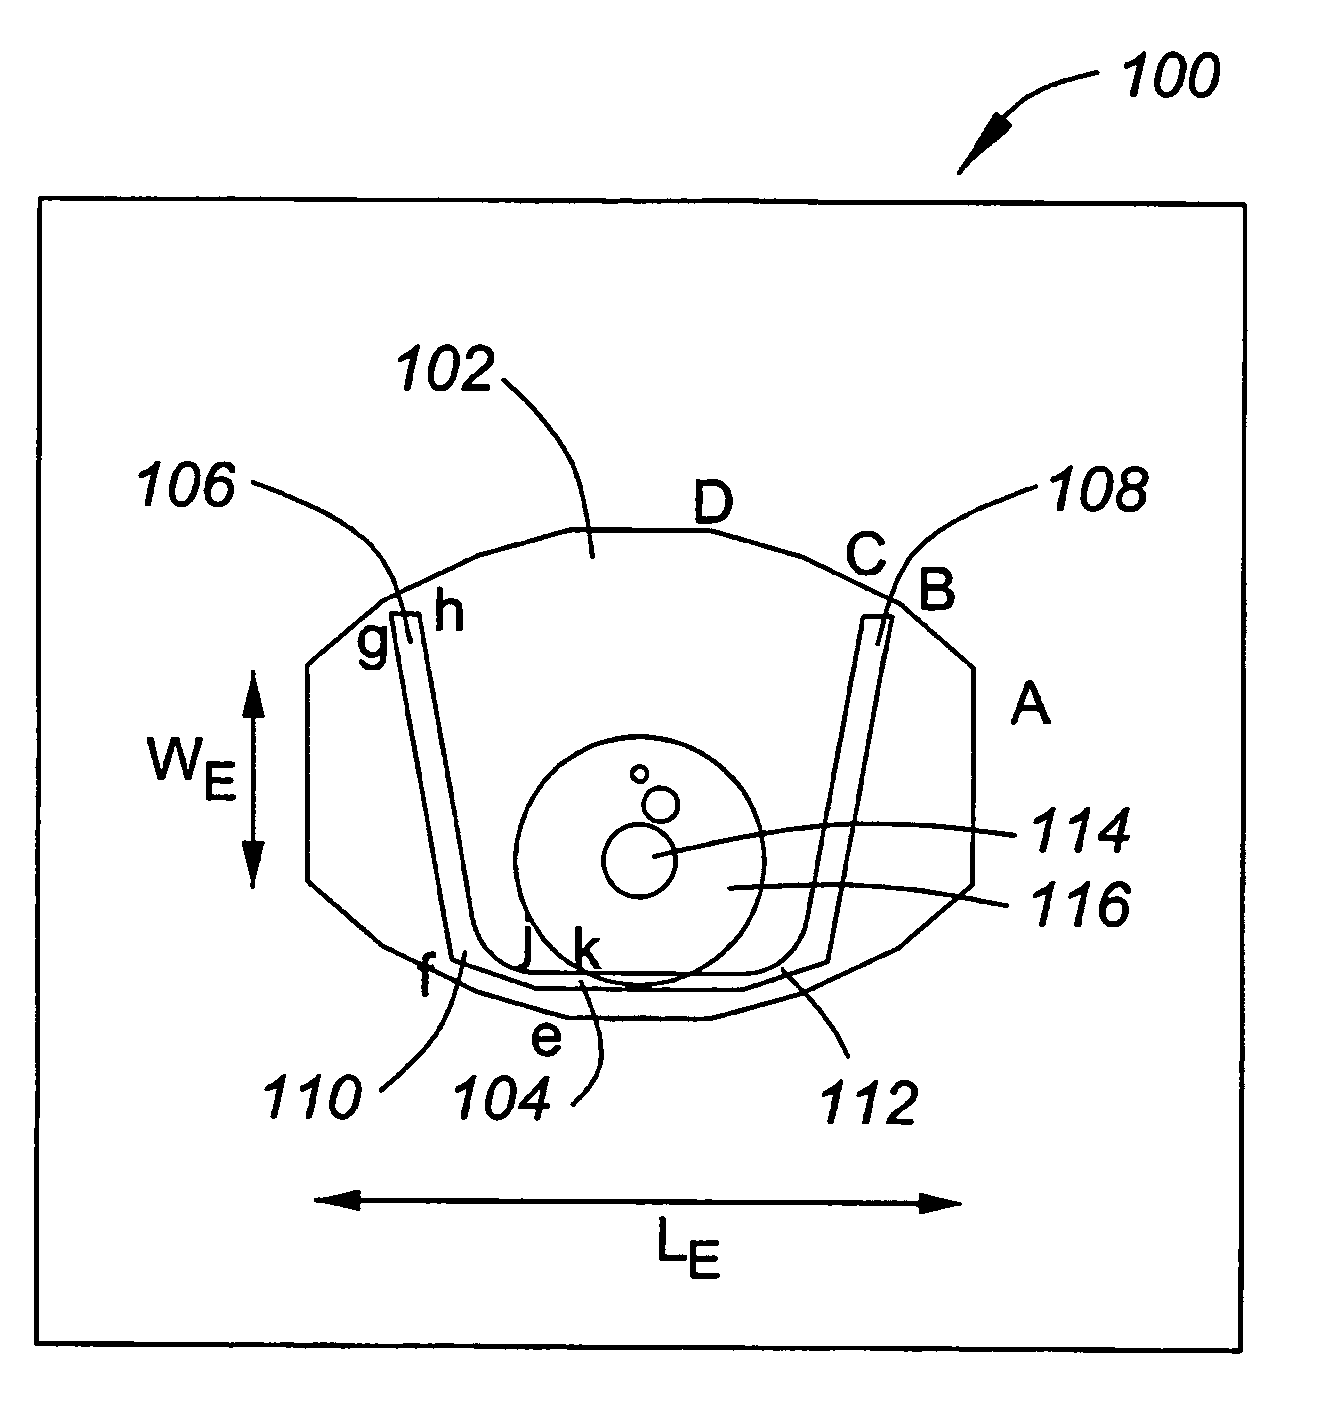 Low profile hybrid phased array antenna system configuration and element